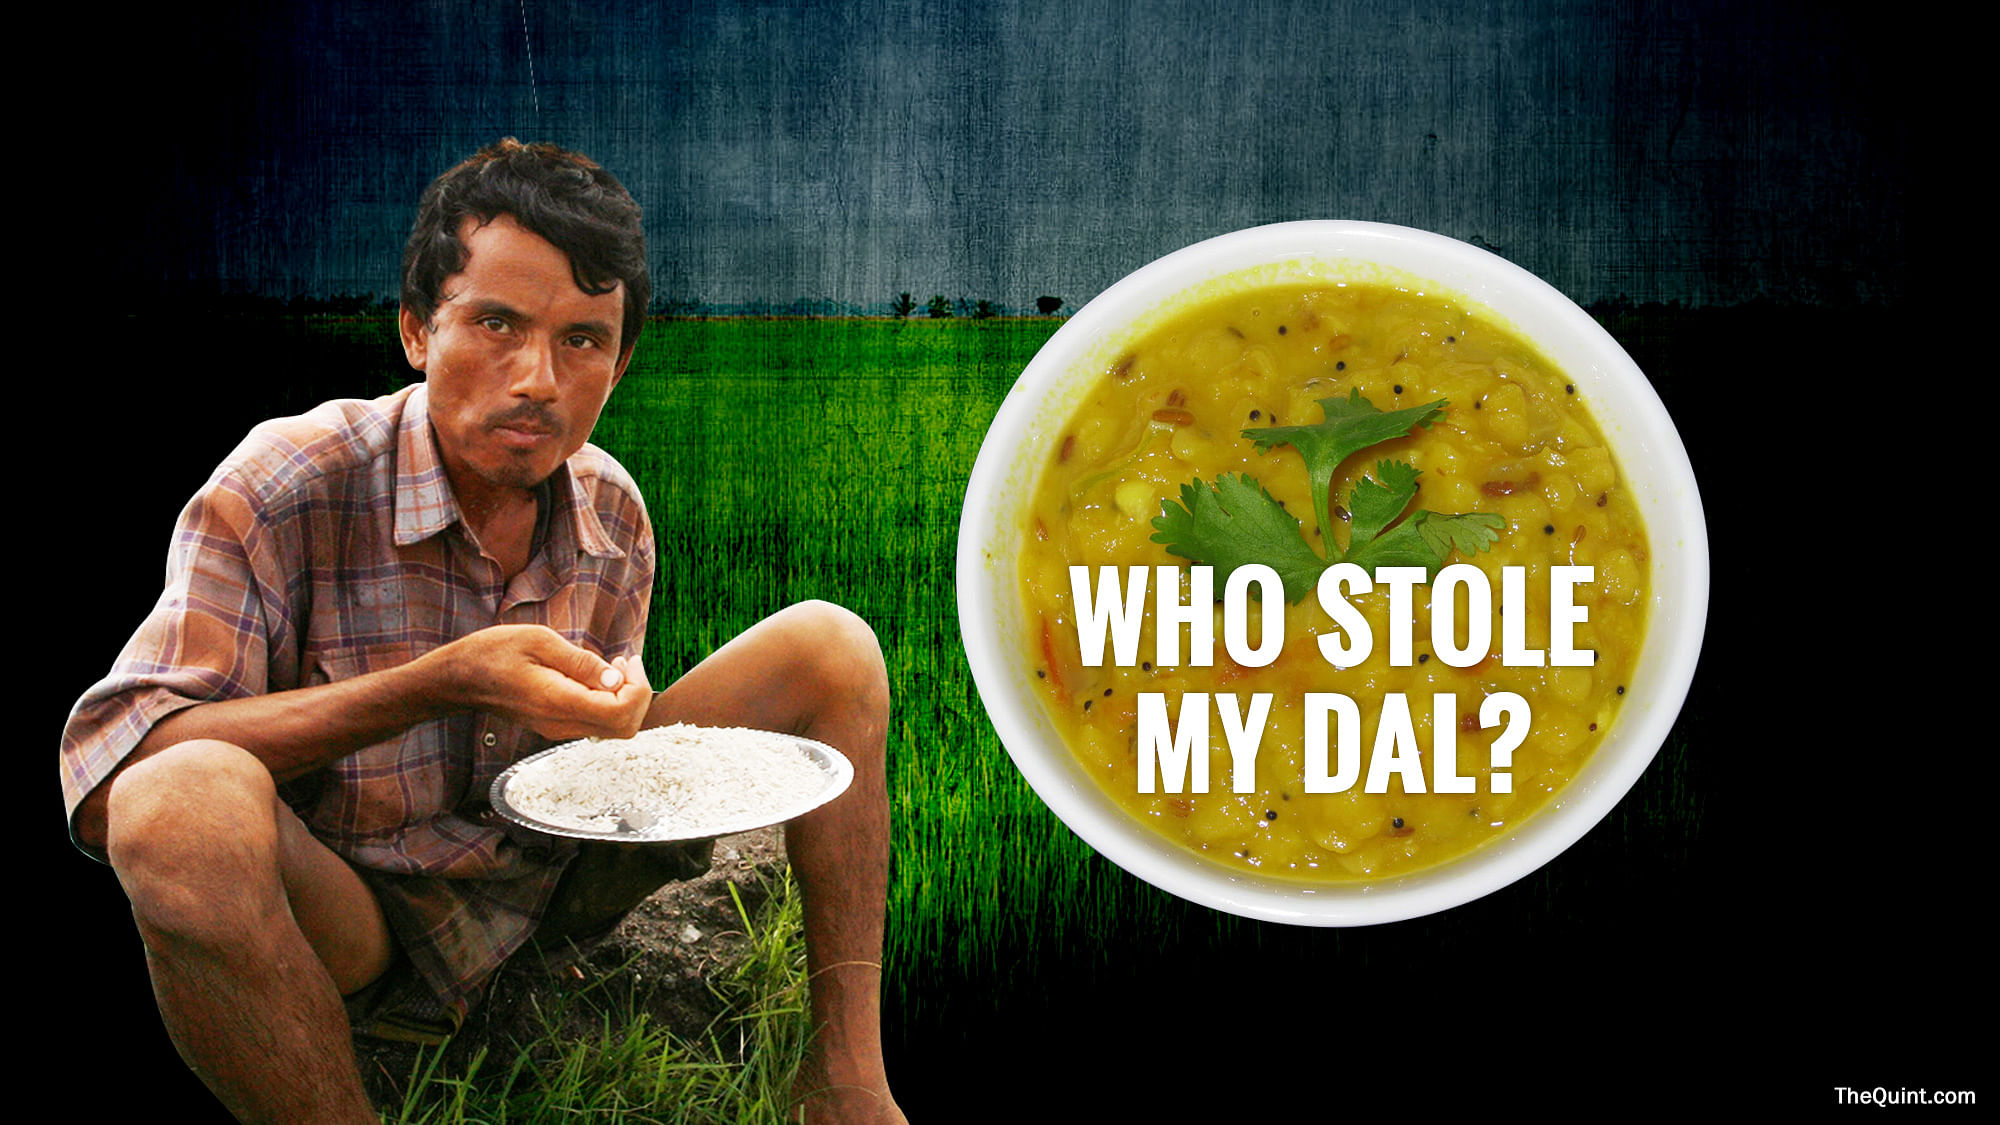 Dal (cooked pulses) the essential part of the Indian staple diet has become too expensive for the common man. (Image source Reuters. Image altered by <b>The Quint</b>)